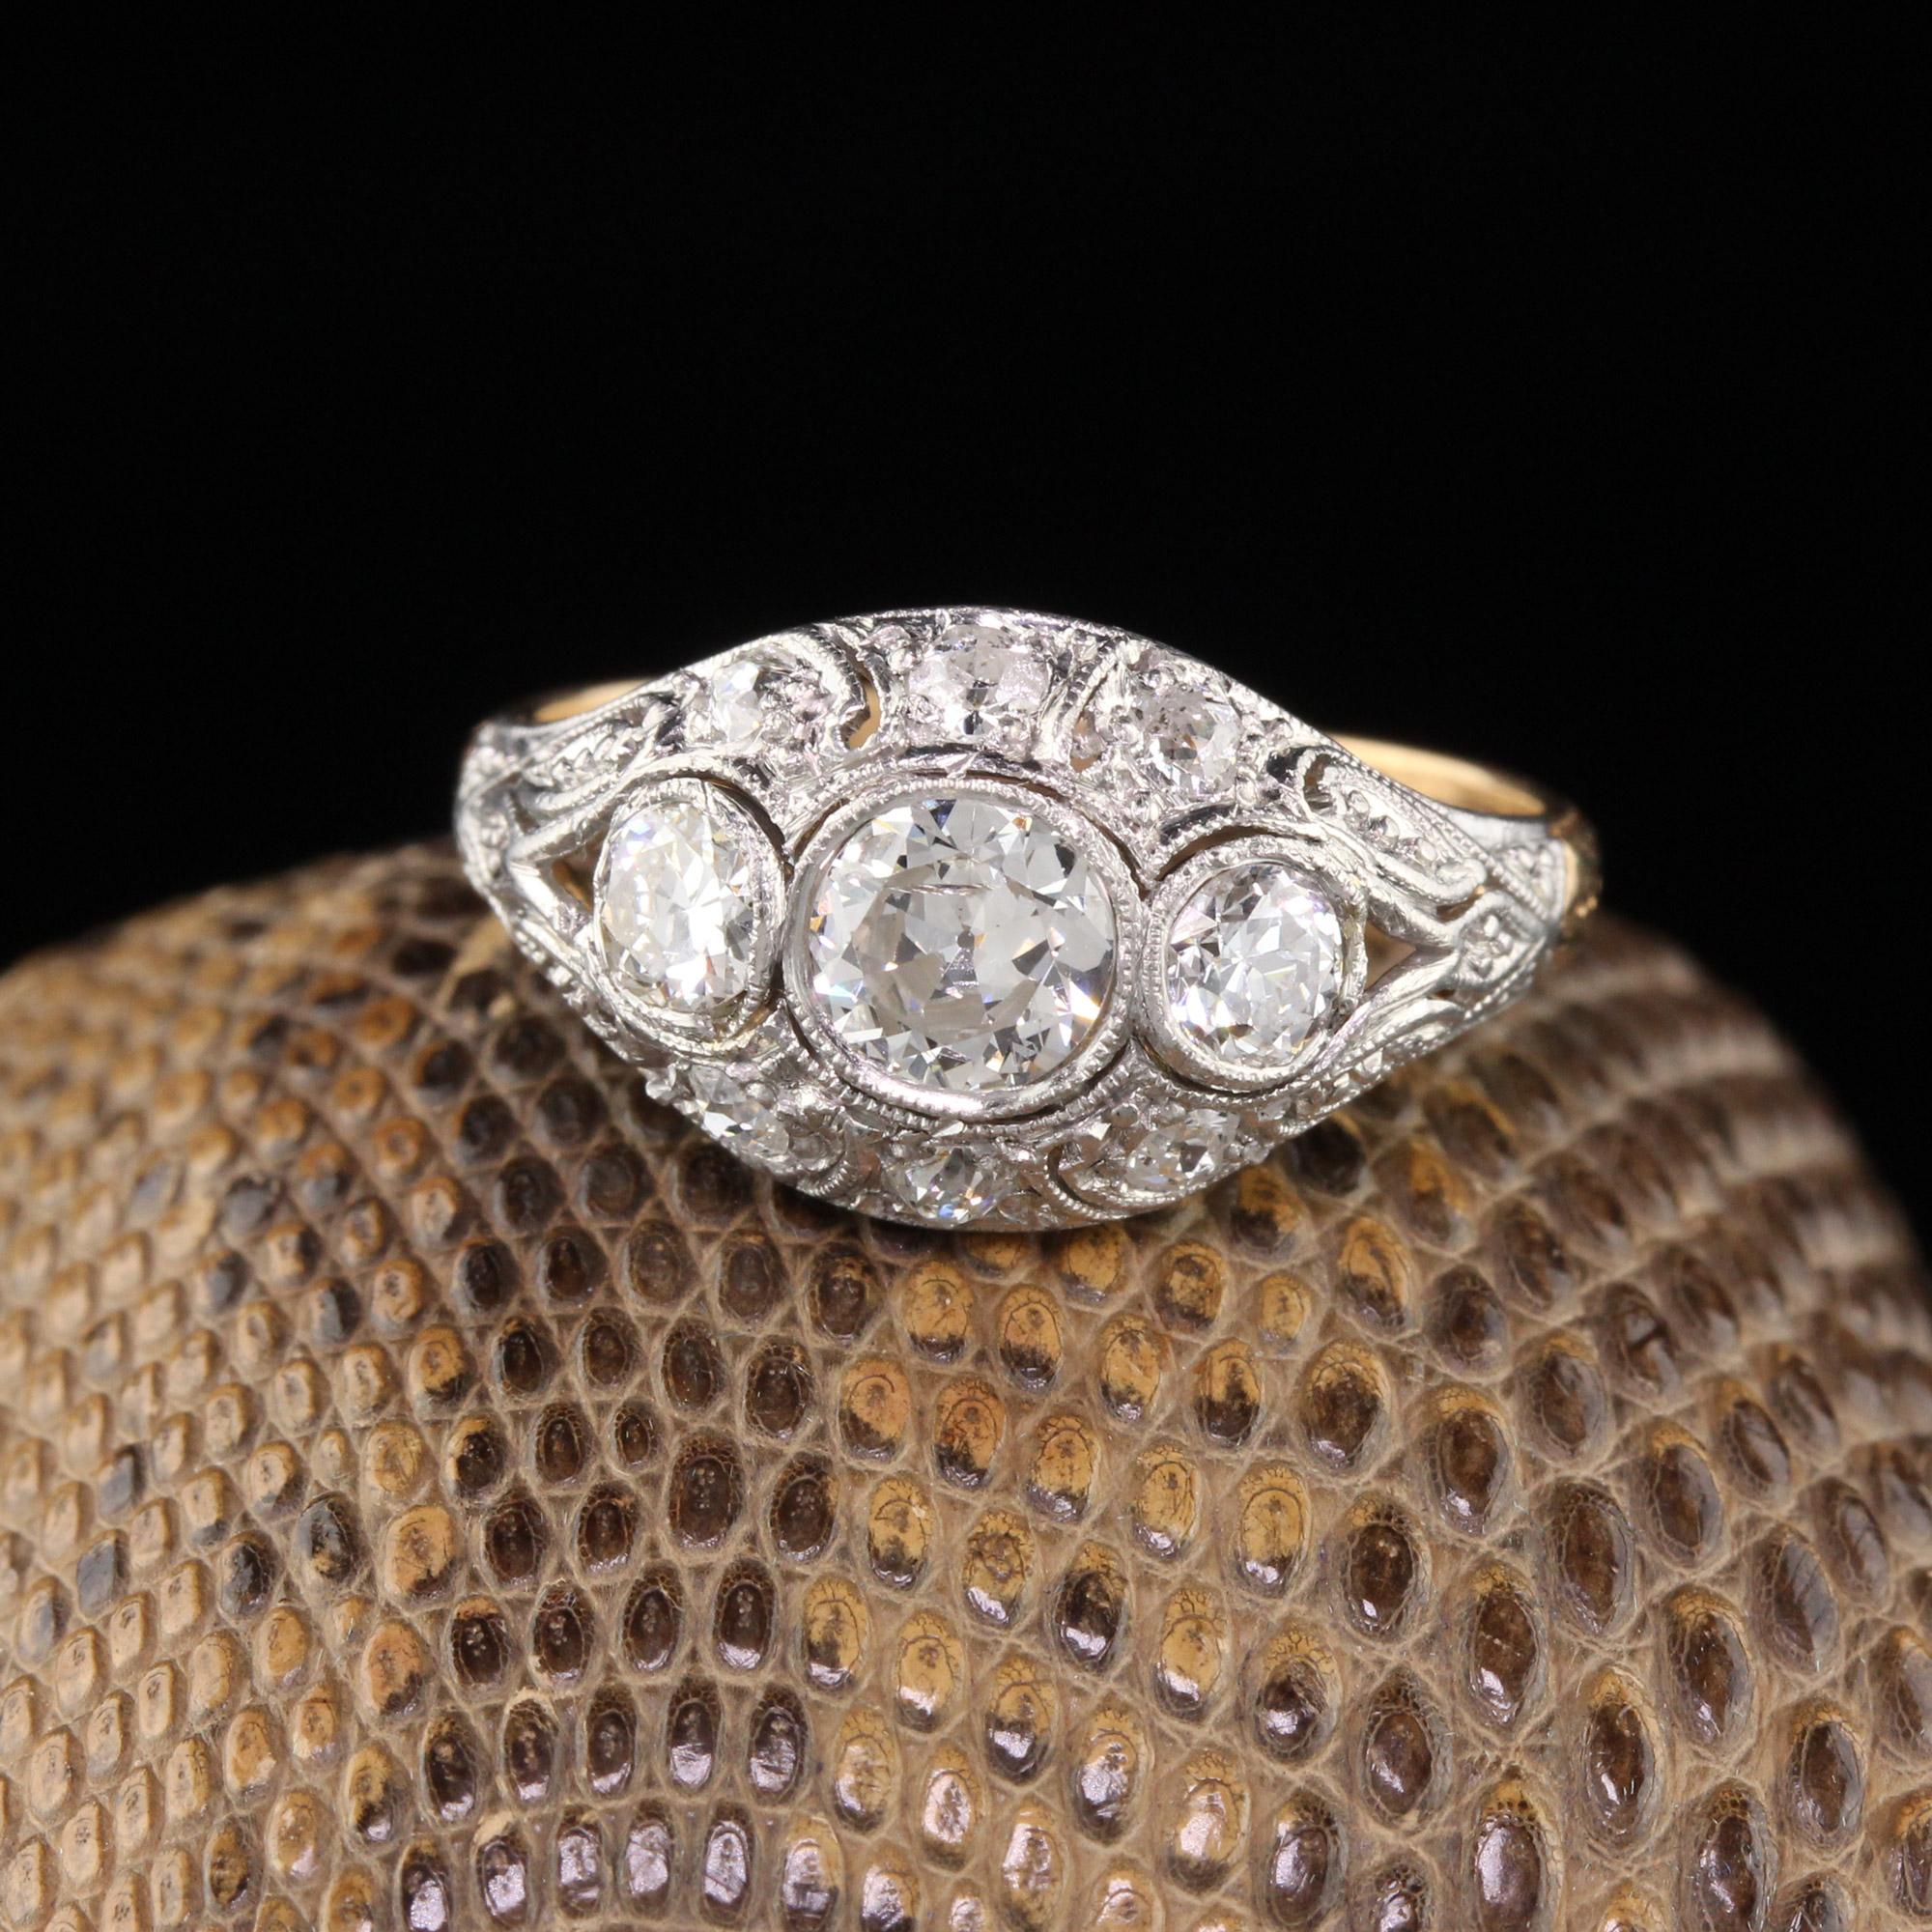 Stunning Edwardian Engagement ring with 3 old cut diamonds bezel set with beautiful filigree work and smaller diamonds surrounding. Platinum top with a yellow gold shank. Sits nice and low to the finger. In excellent condition.

Item #R0385

Metal: